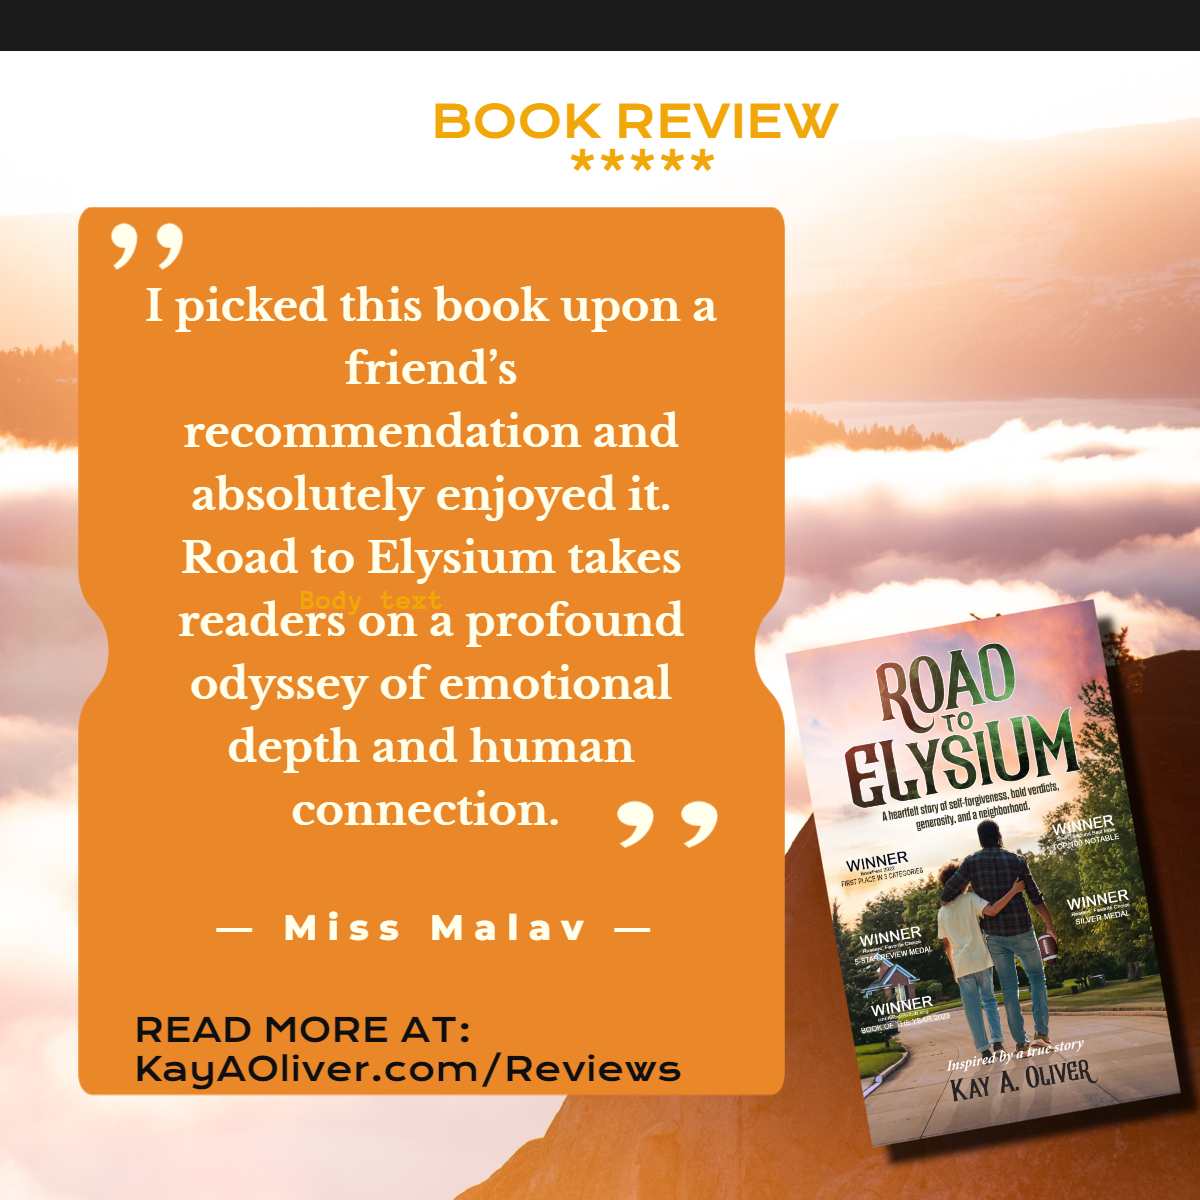 Check out the latest review for my #book. Full review can be read at Kayaoliver.com/reviews

#bookrecommendations #readersgonnaread #readingcommunity #readerscommunity #bookreview #fivestarreview #greatnovels #greatbooks